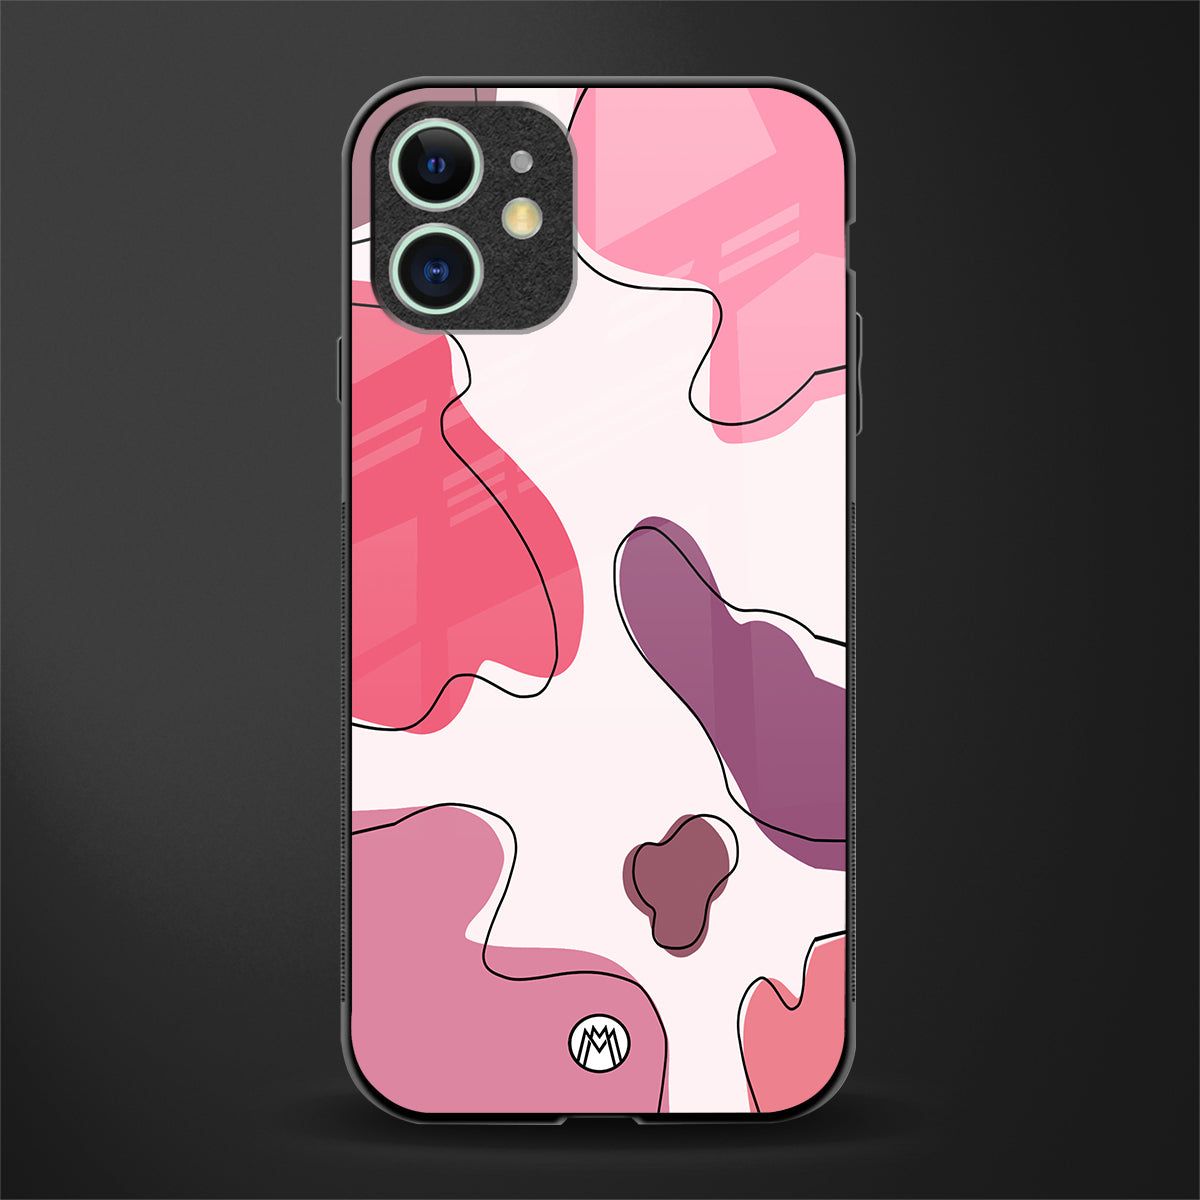 cotton candy taffy edition glass case for iphone 12 mini image